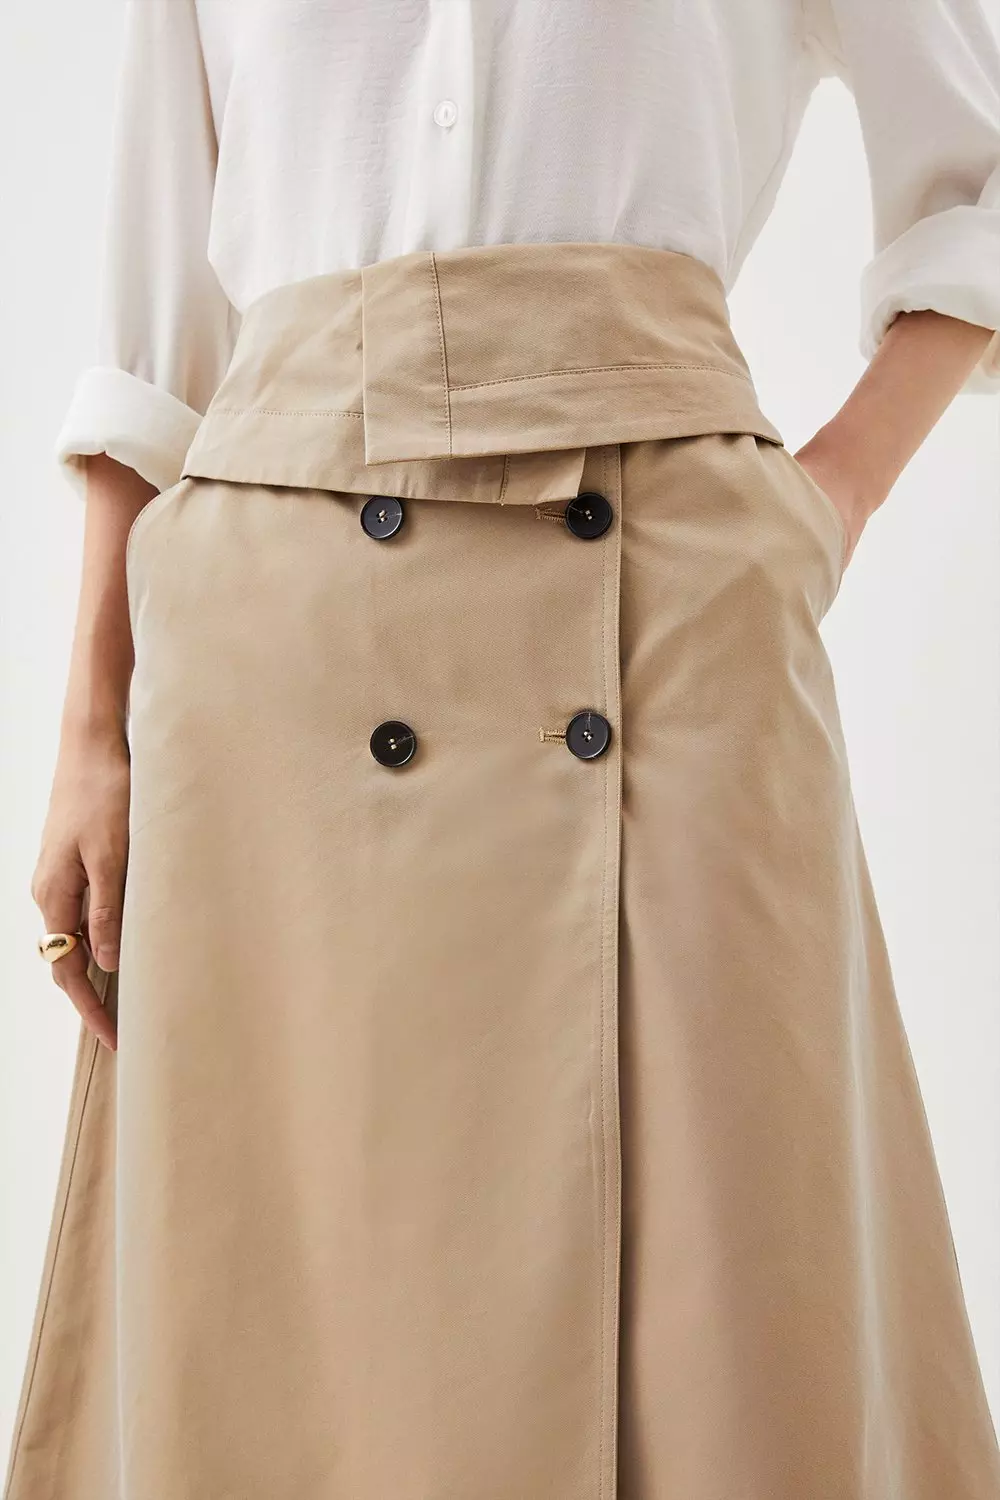 How the Trench Coat Became the Trench Ball Gown. And Skirt. And